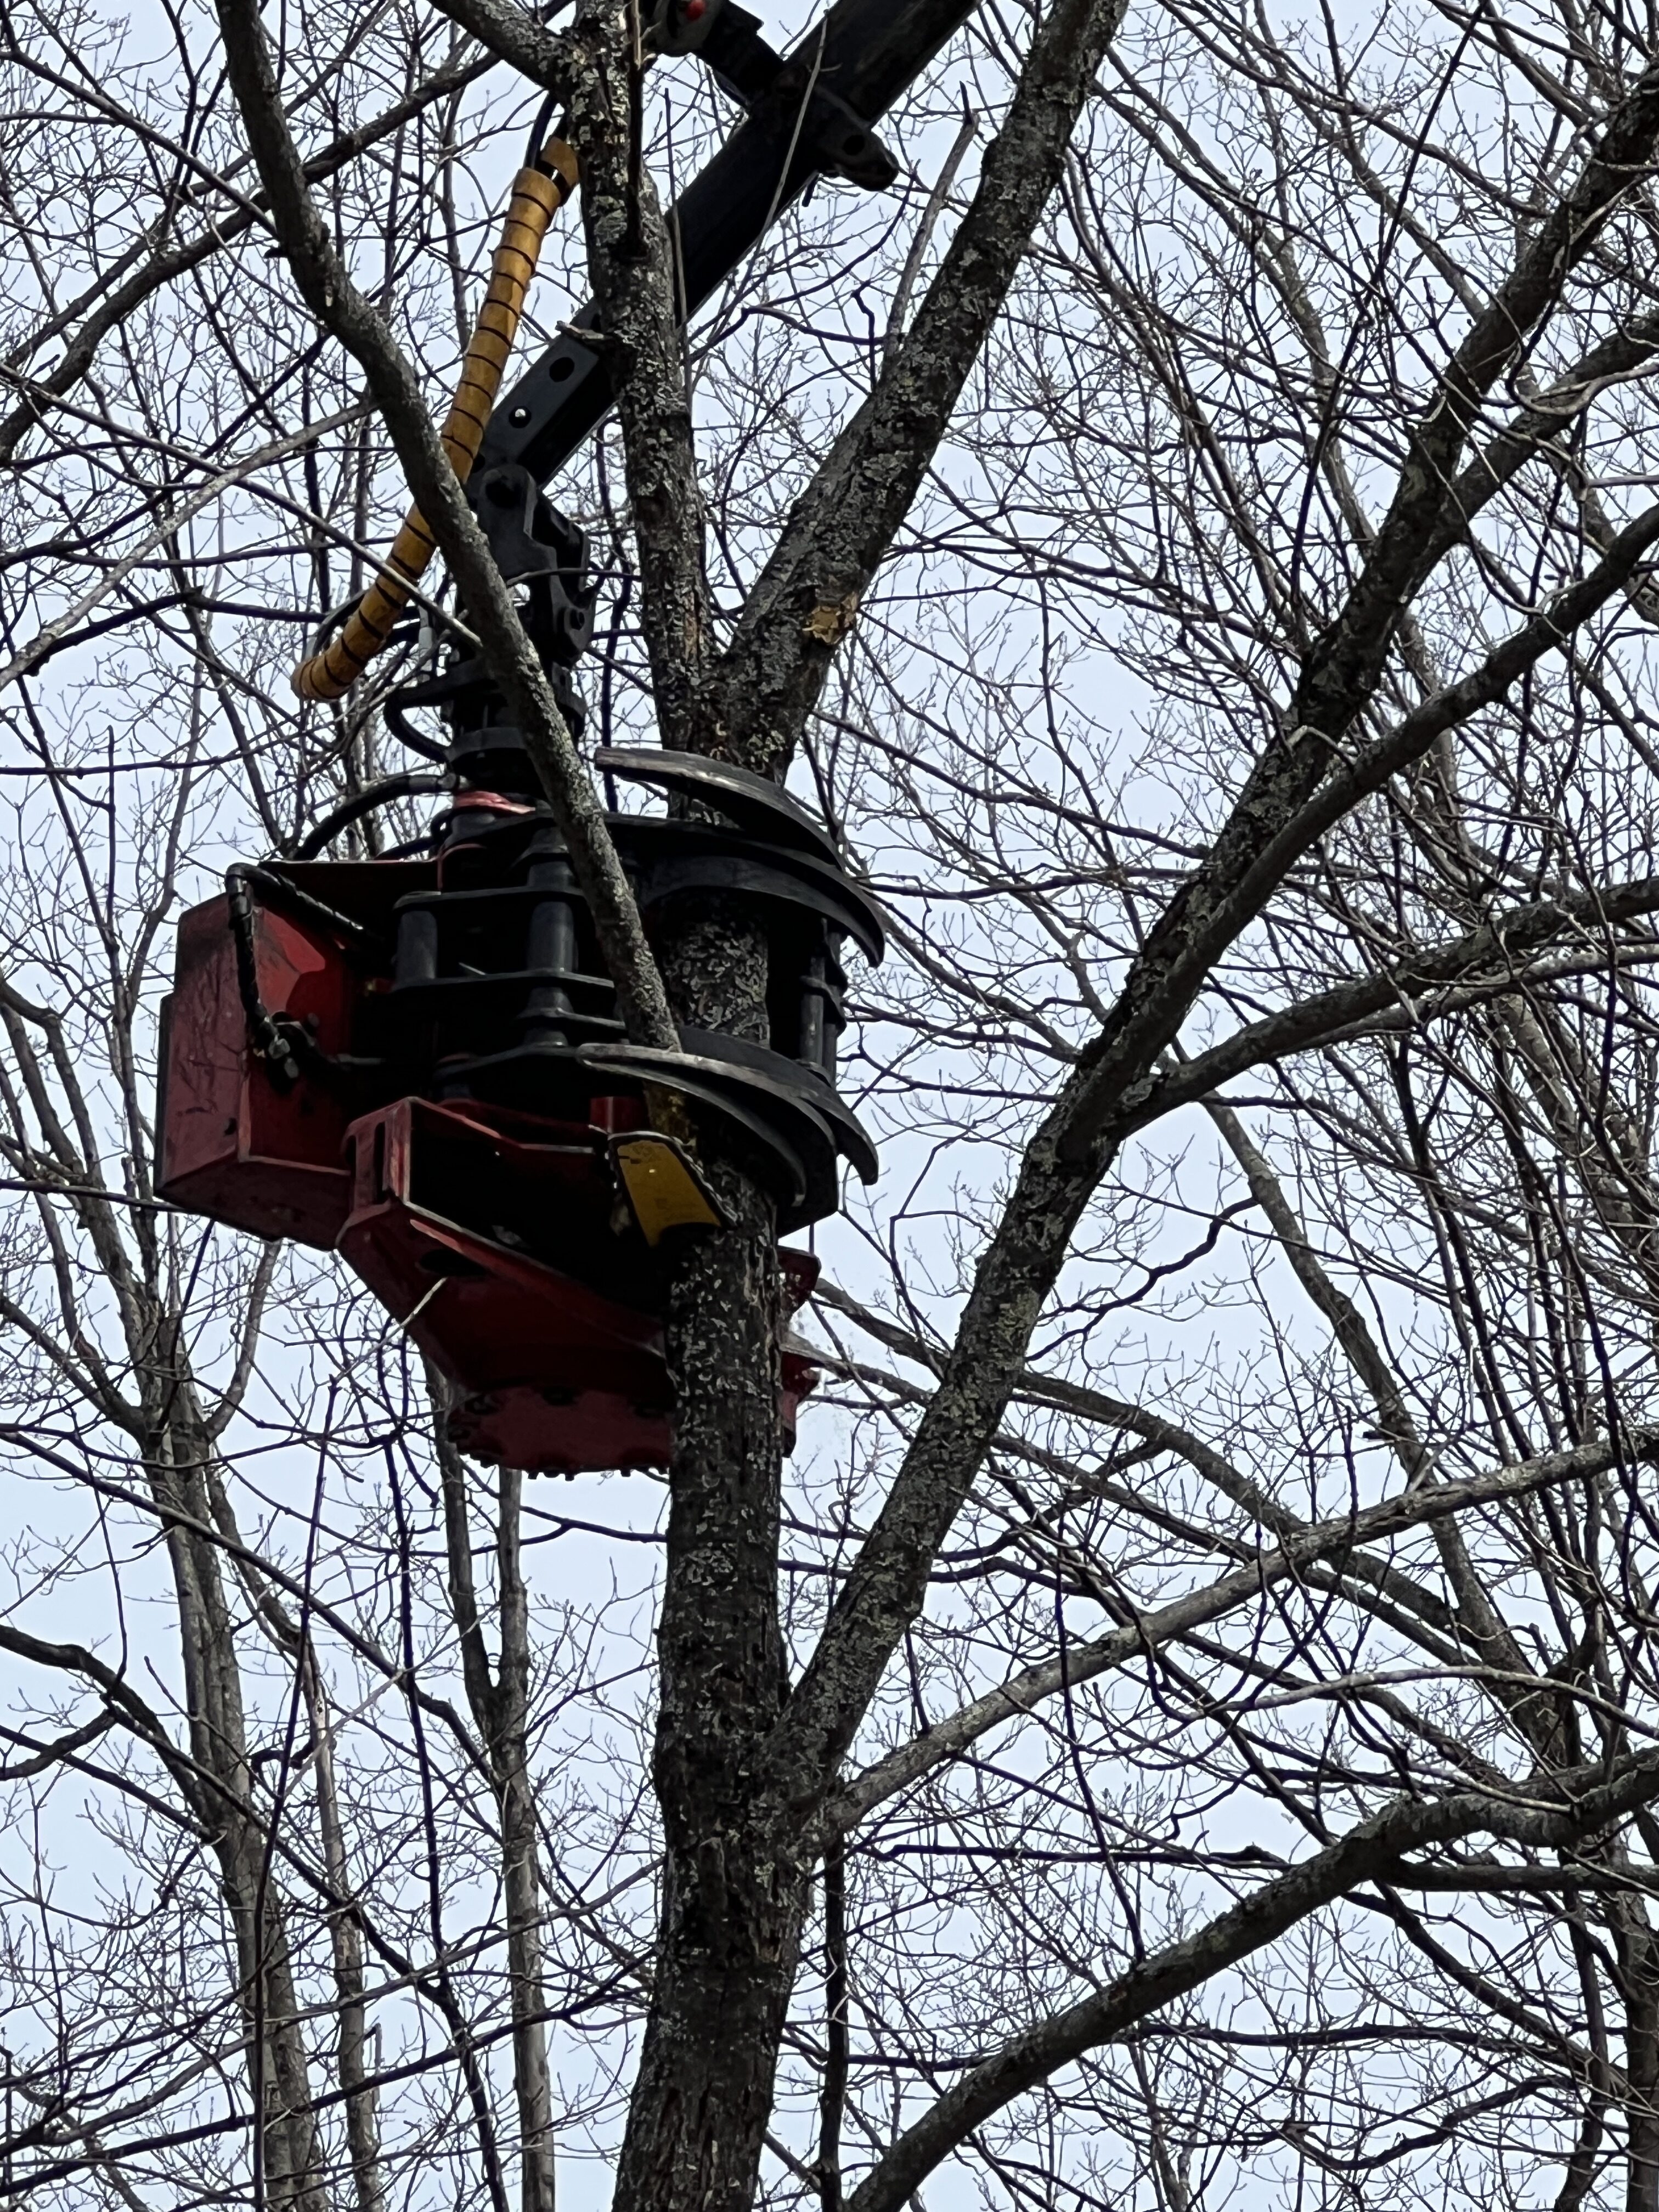 Forty feet in the air and 50 feet from the truck that this device is mounted on, four arms wrap around the tree trunk while a remotely controlled chainsaw below the arms safely cuts off the top of the tree. With the arms wrapped around the trunk, the section can be lowered to the ground to be trimmed and cut for firewood or put in a chipper. No climber needed. ANDREW MESSINGER